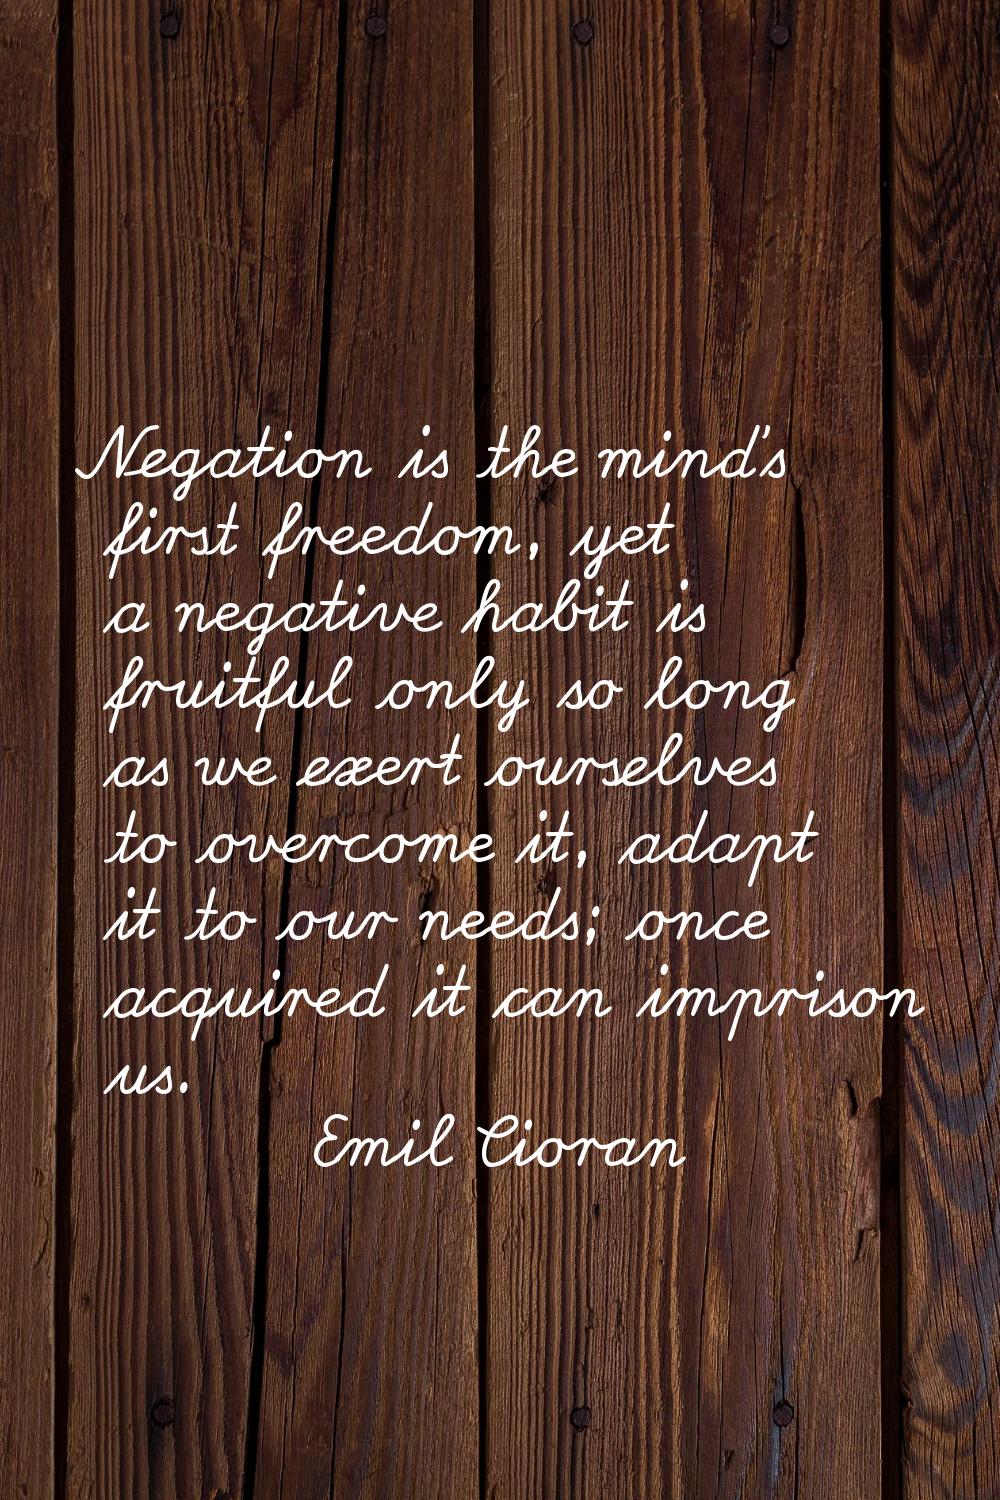 Negation is the mind's first freedom, yet a negative habit is fruitful only so long as we exert our